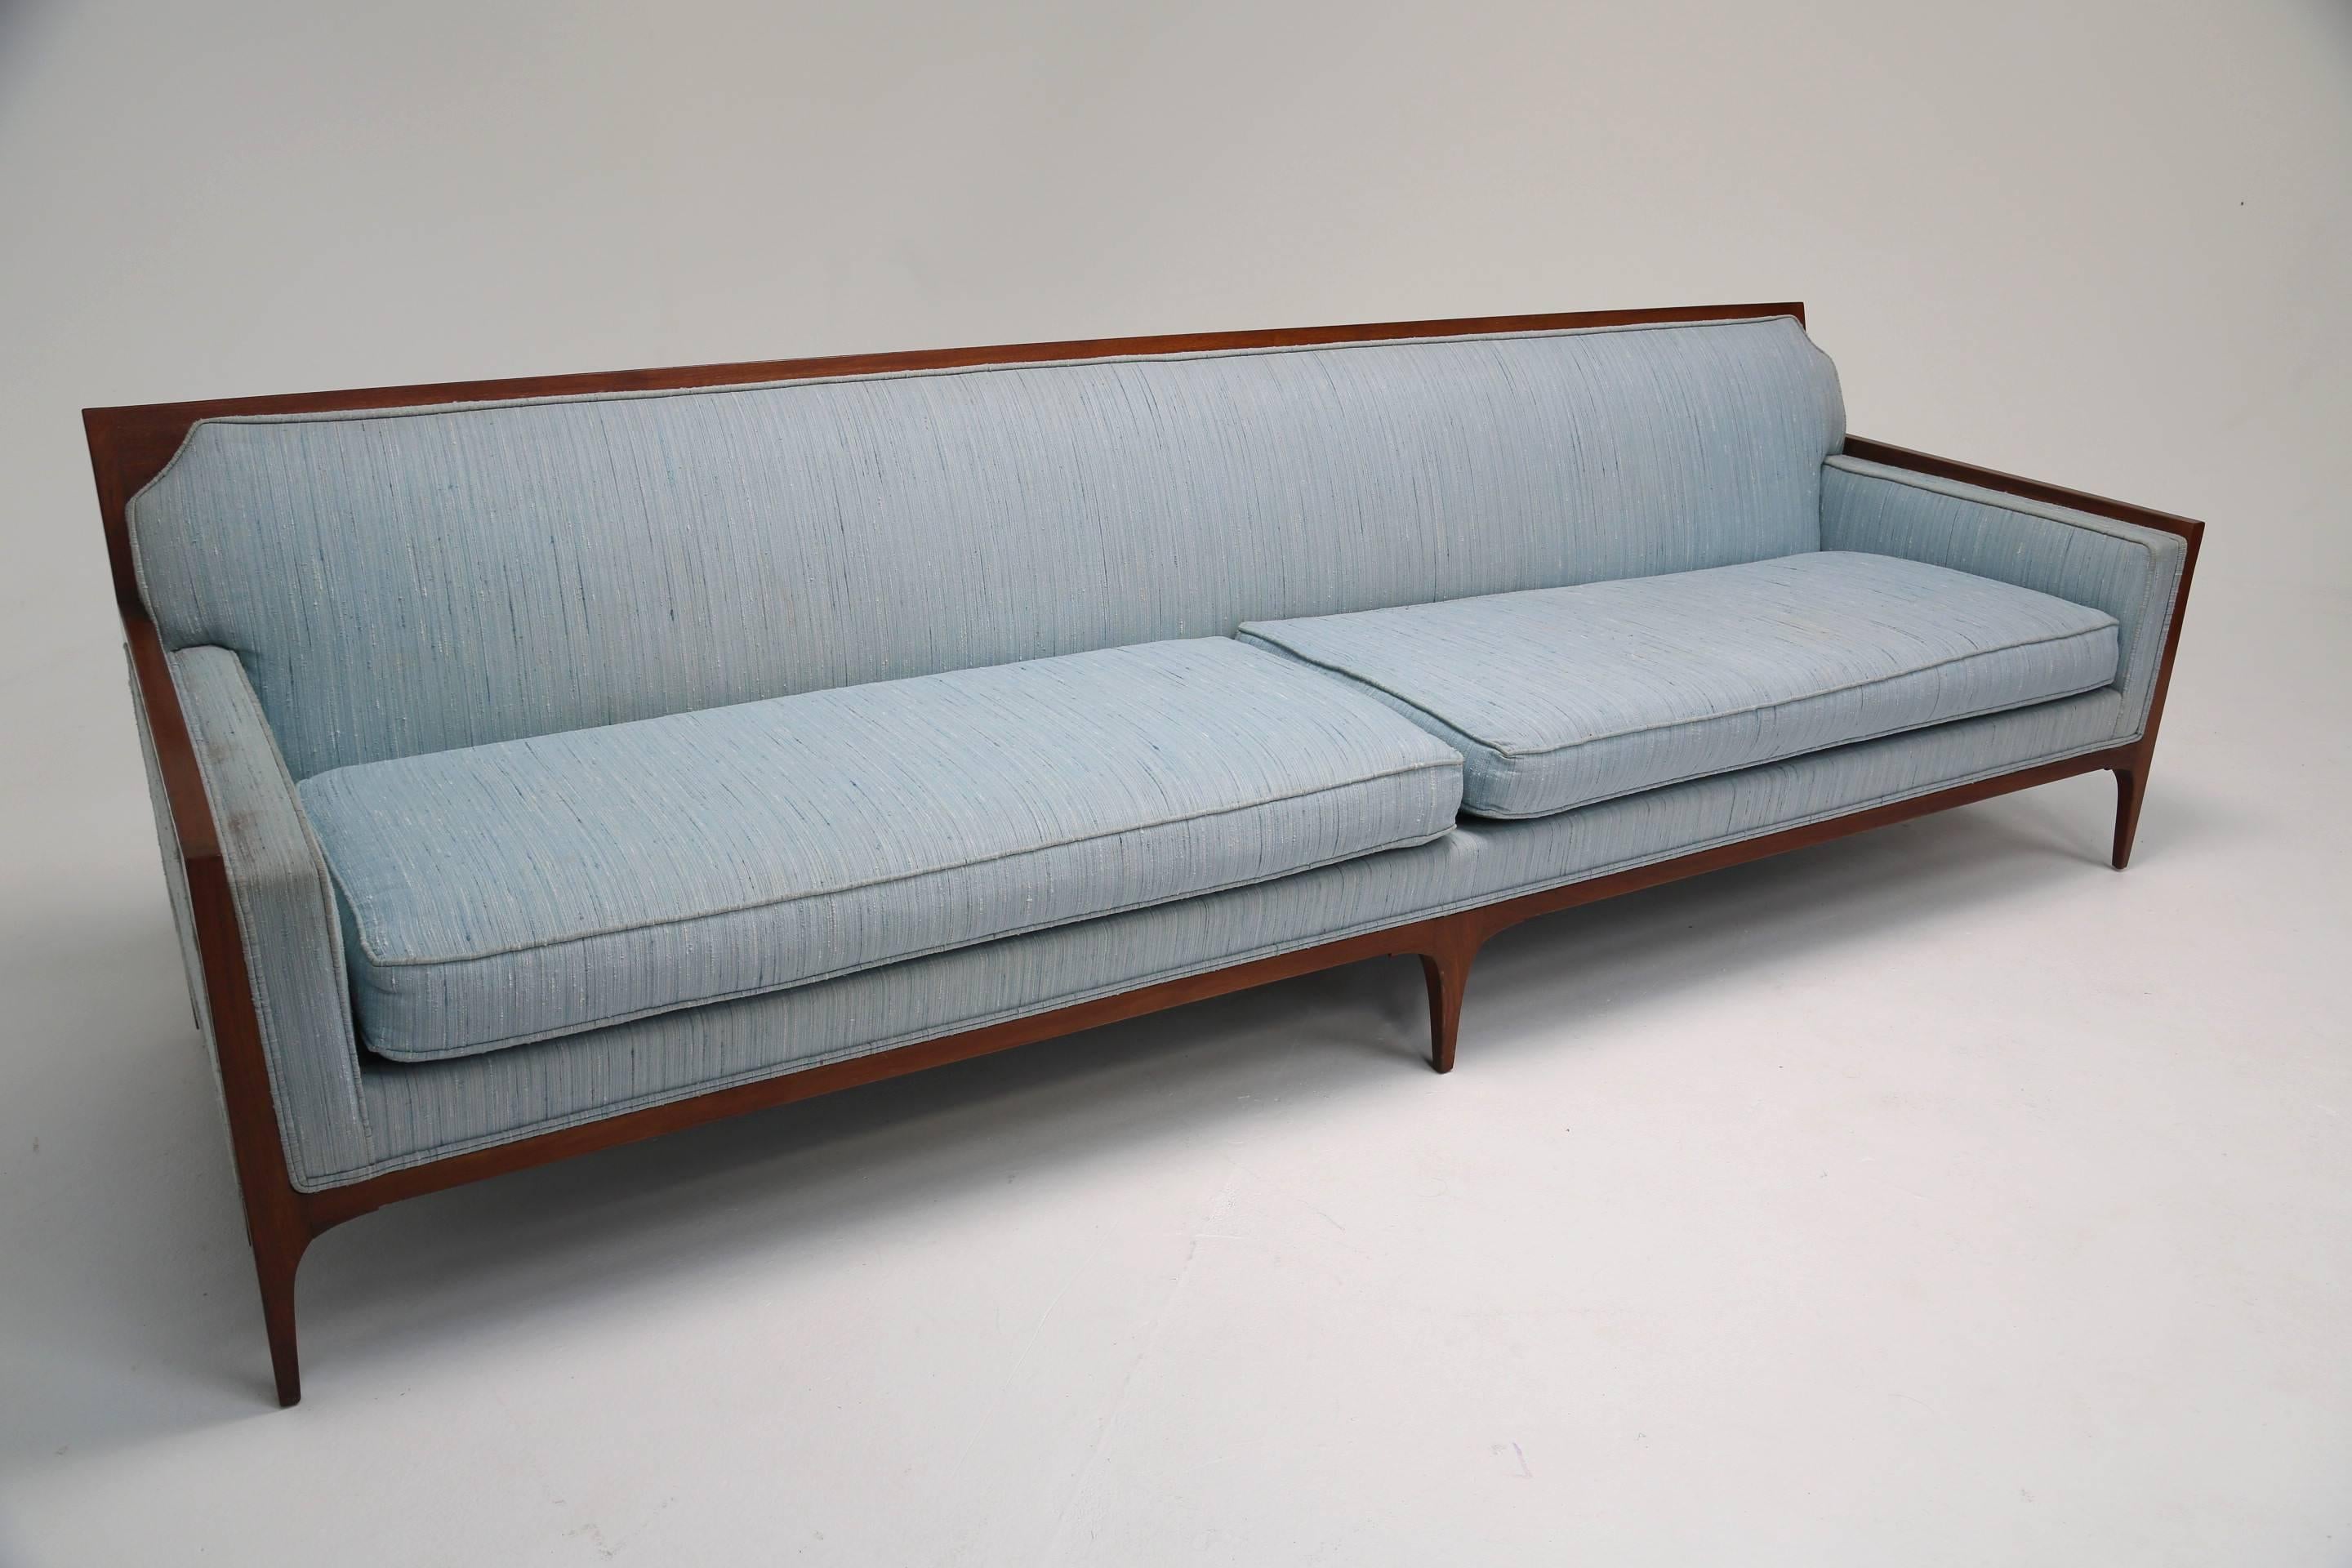 This elegant 1950s four-seat sofa in the style of Paul McCobb, is upholstered in a pale blue fabric with a walnut frame. Beautiful lines have been employed in it's design to offer the piece a Classic quality whilst the sturdy walnut frame offers an